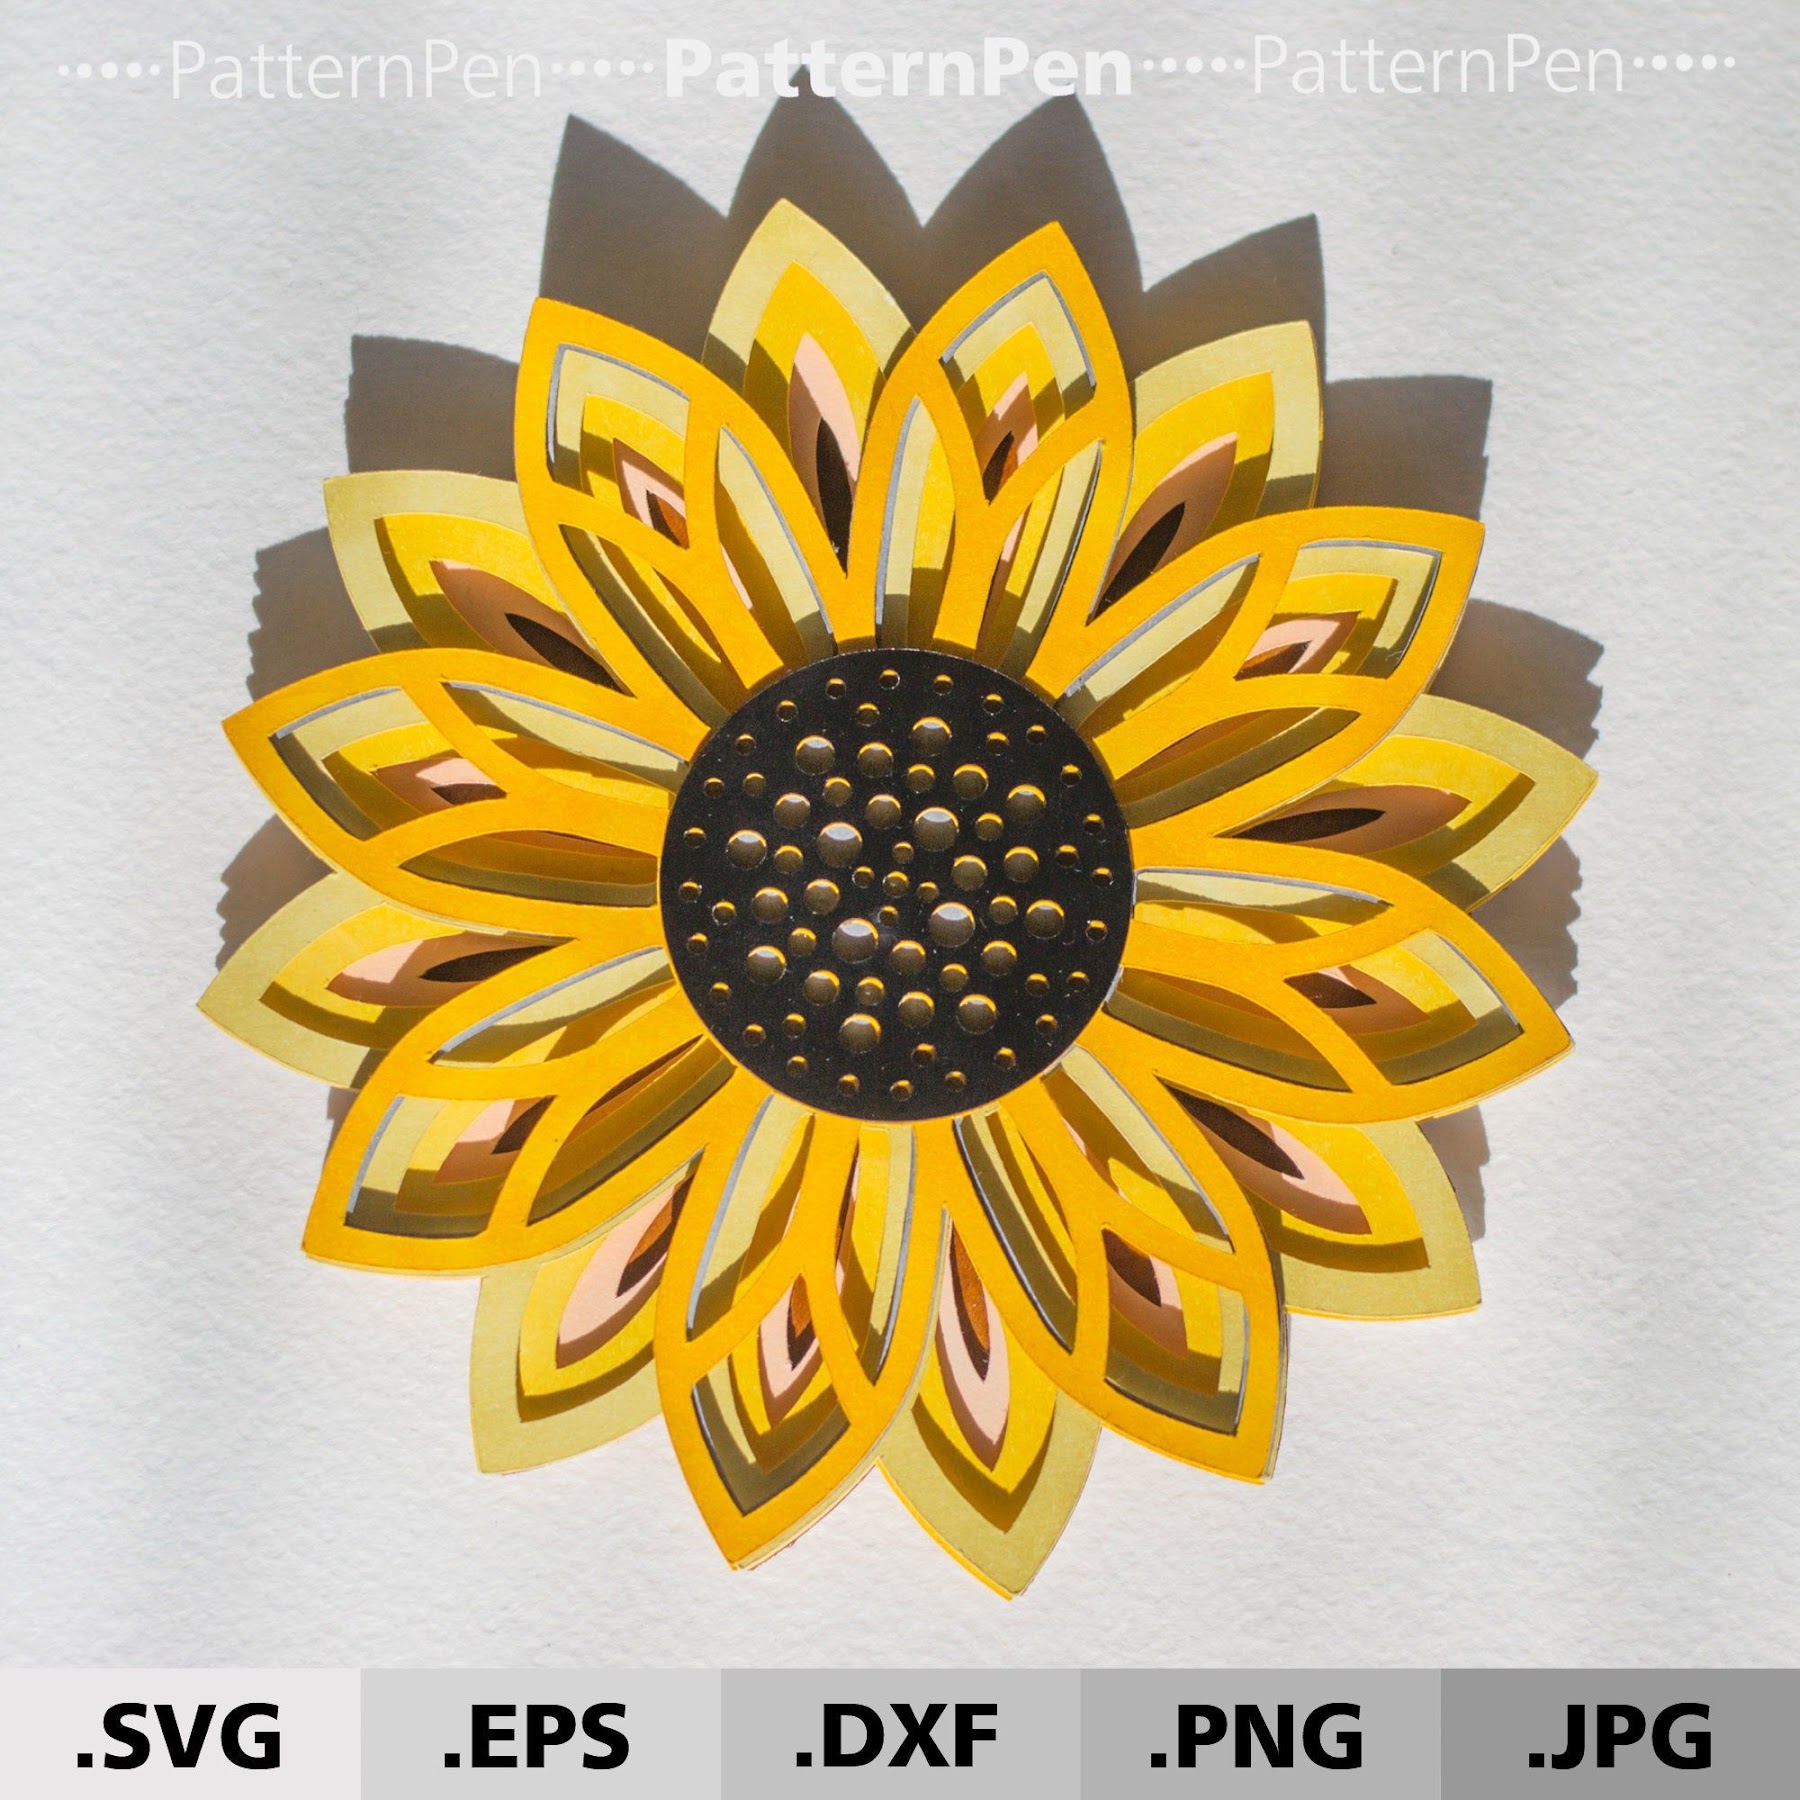 Download 983+ Layered Sunflower Svg - SVG Bundles for Cricut, Silhouette and Other Machine